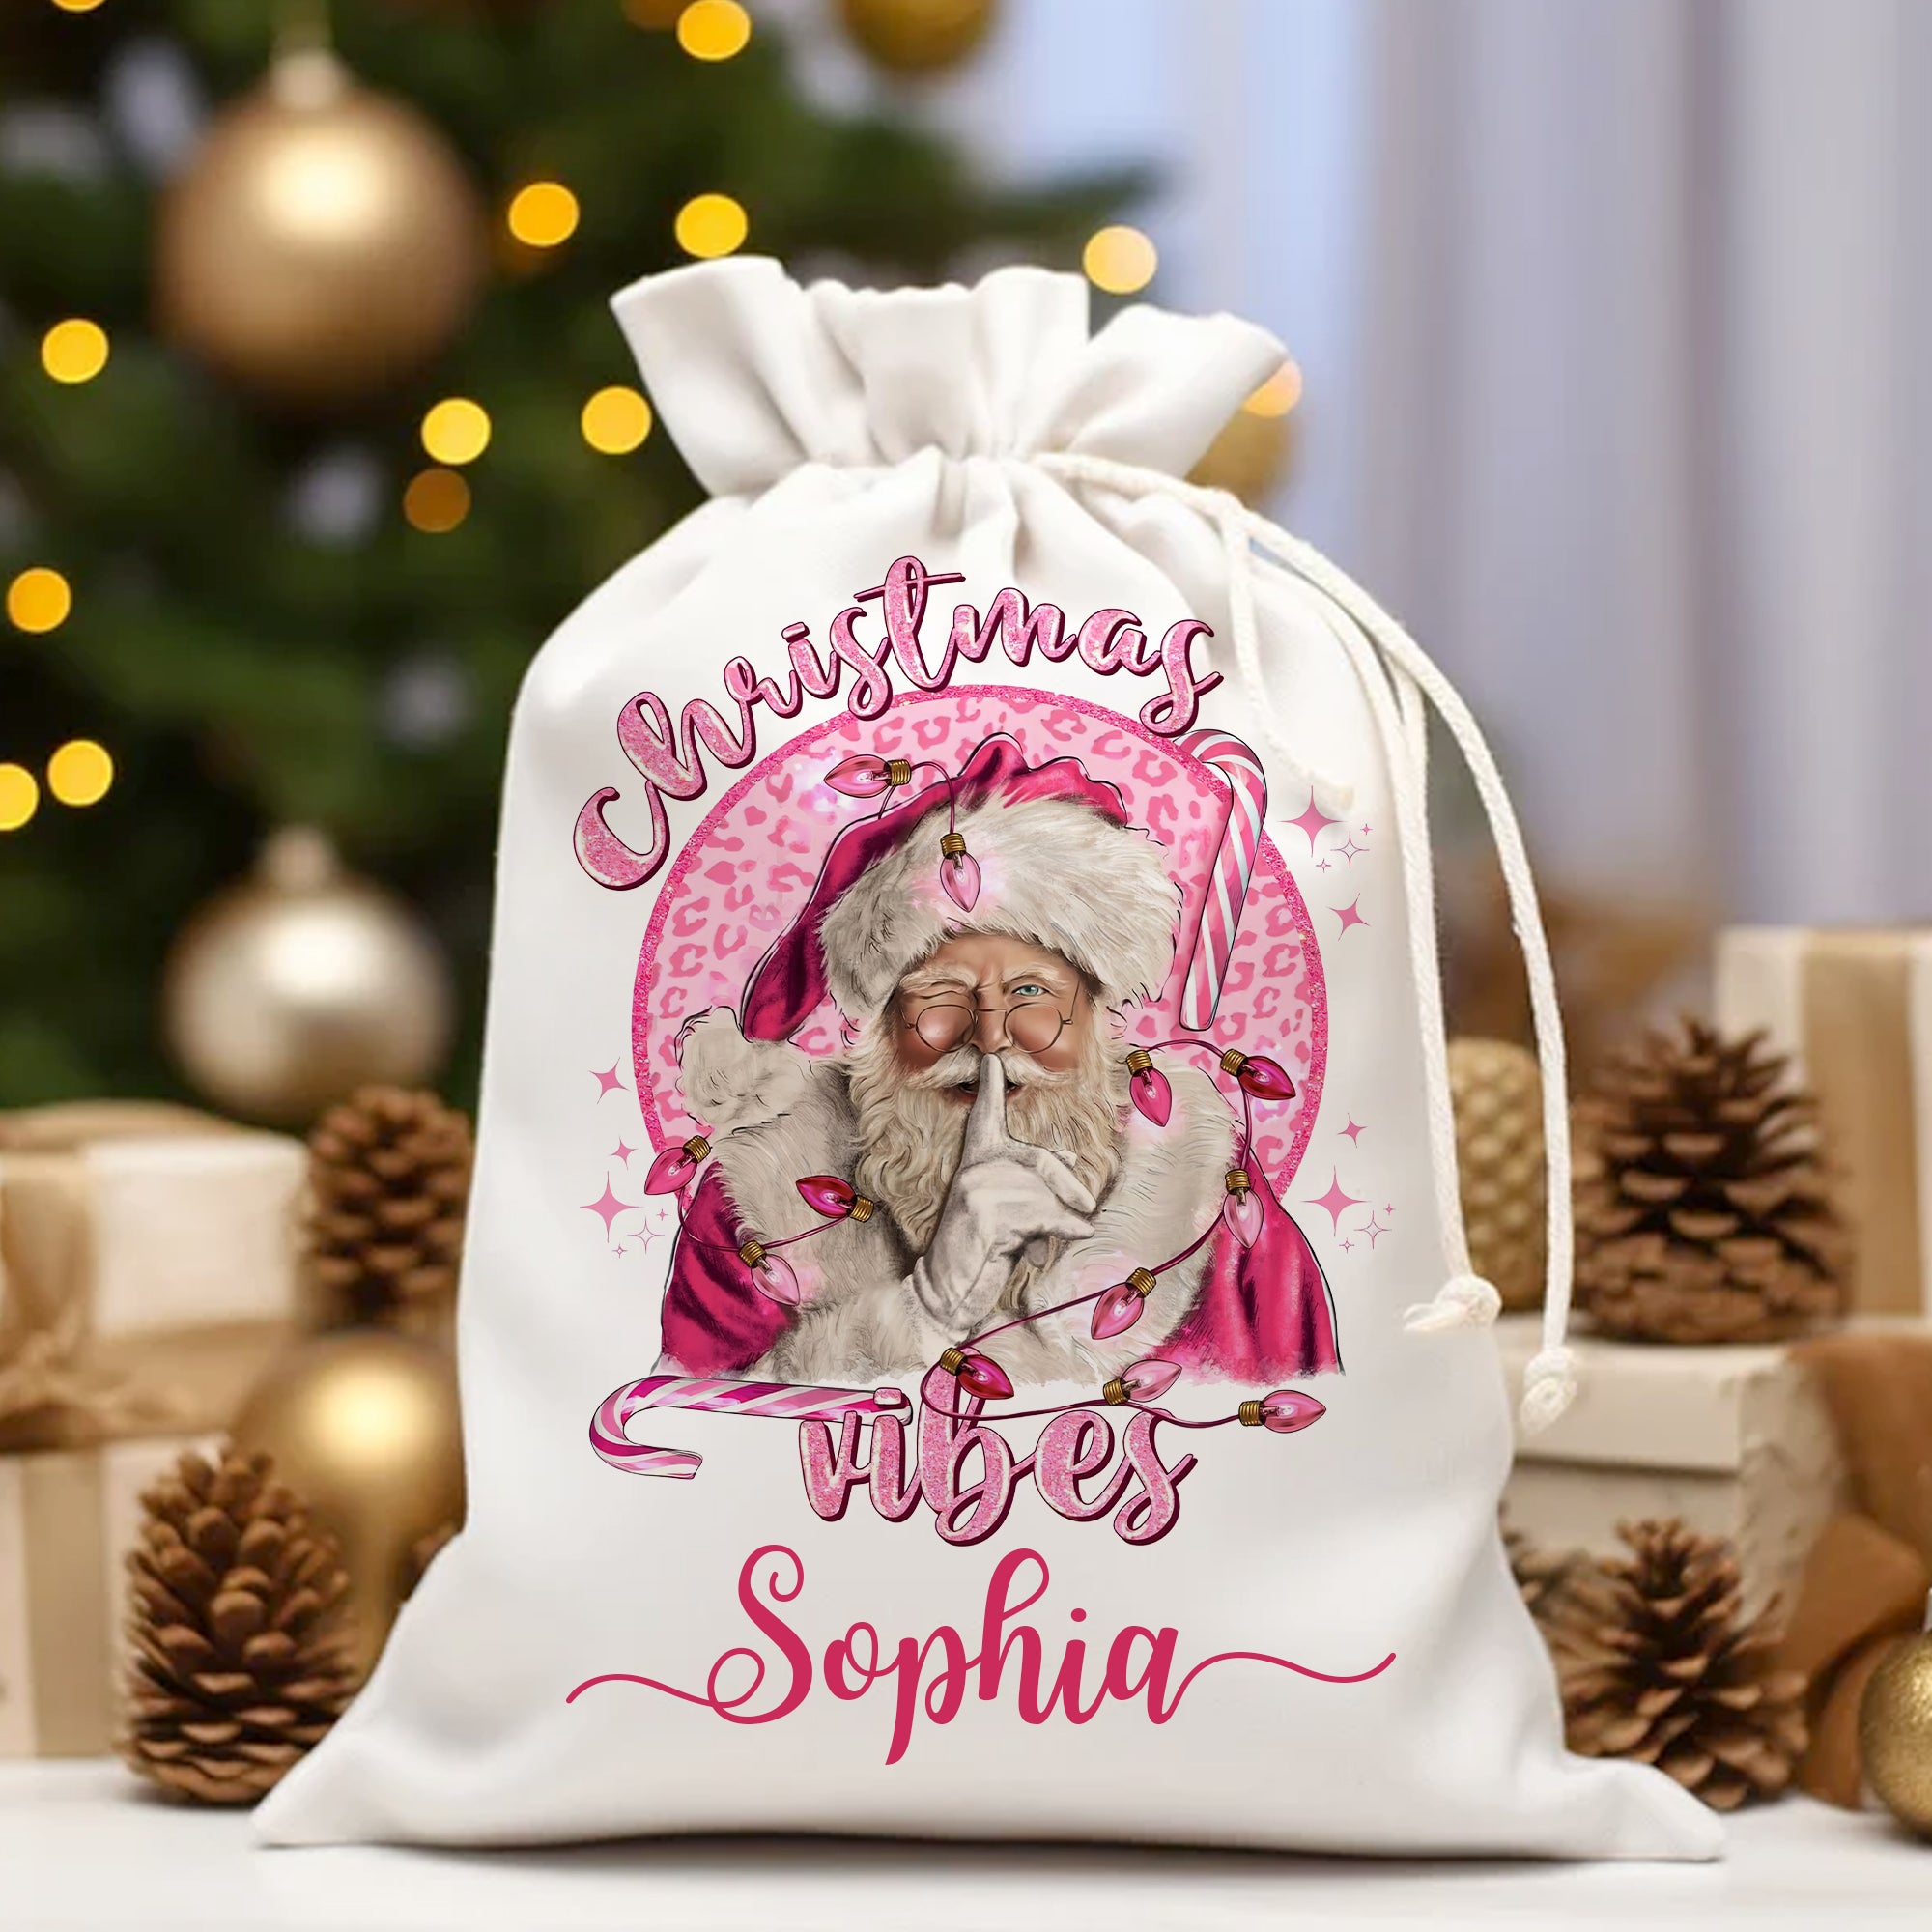 Christmas Decor Gift, Custom Background And Name, Personalized String Bag, Christmas Gift